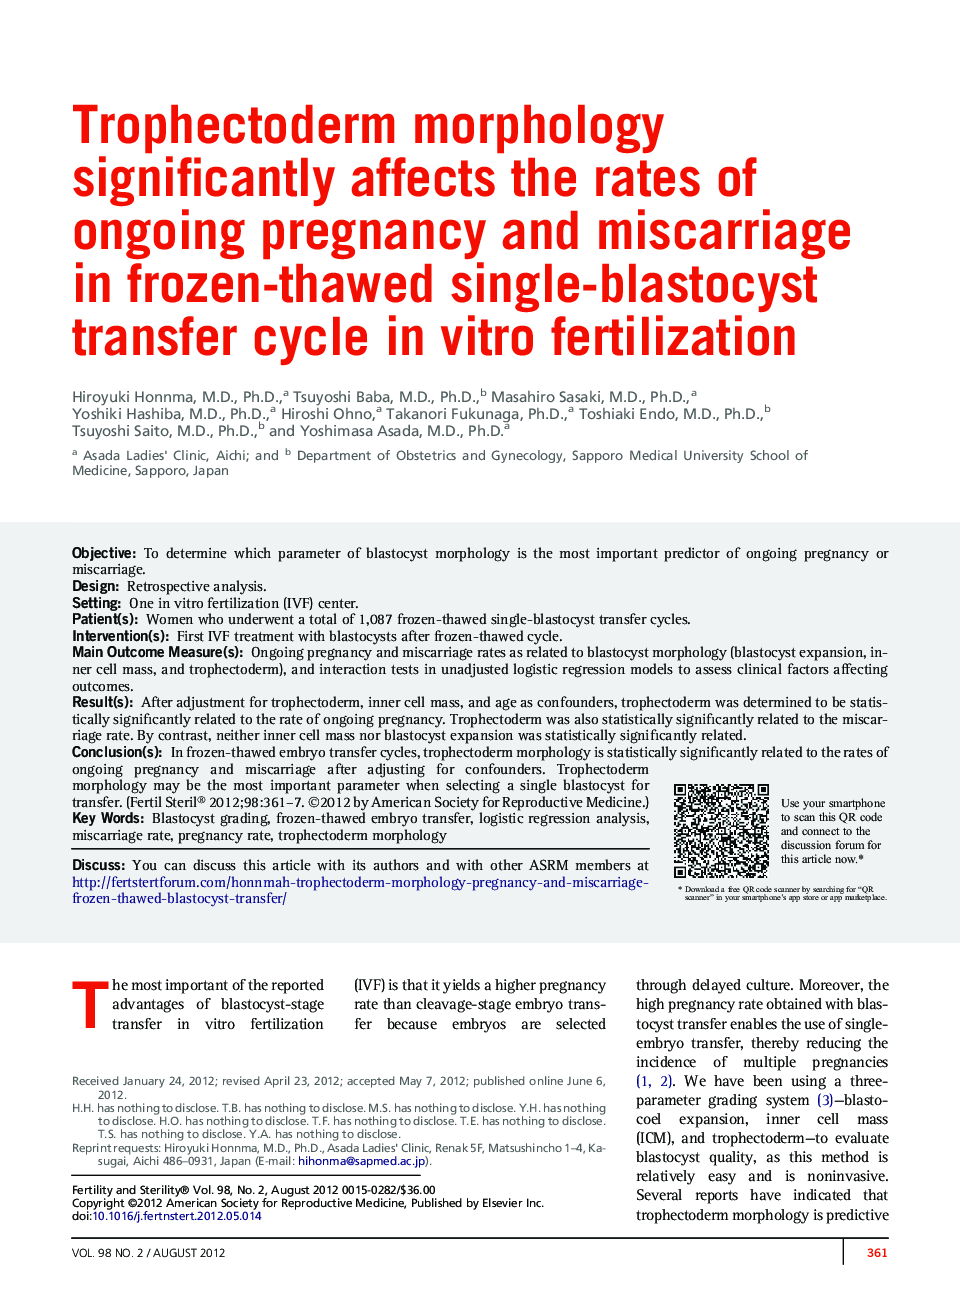 Trophectoderm morphology significantly affects the rates of ongoing pregnancy and miscarriage in frozen-thawed single-blastocyst transfer cycle in vitro fertilization 